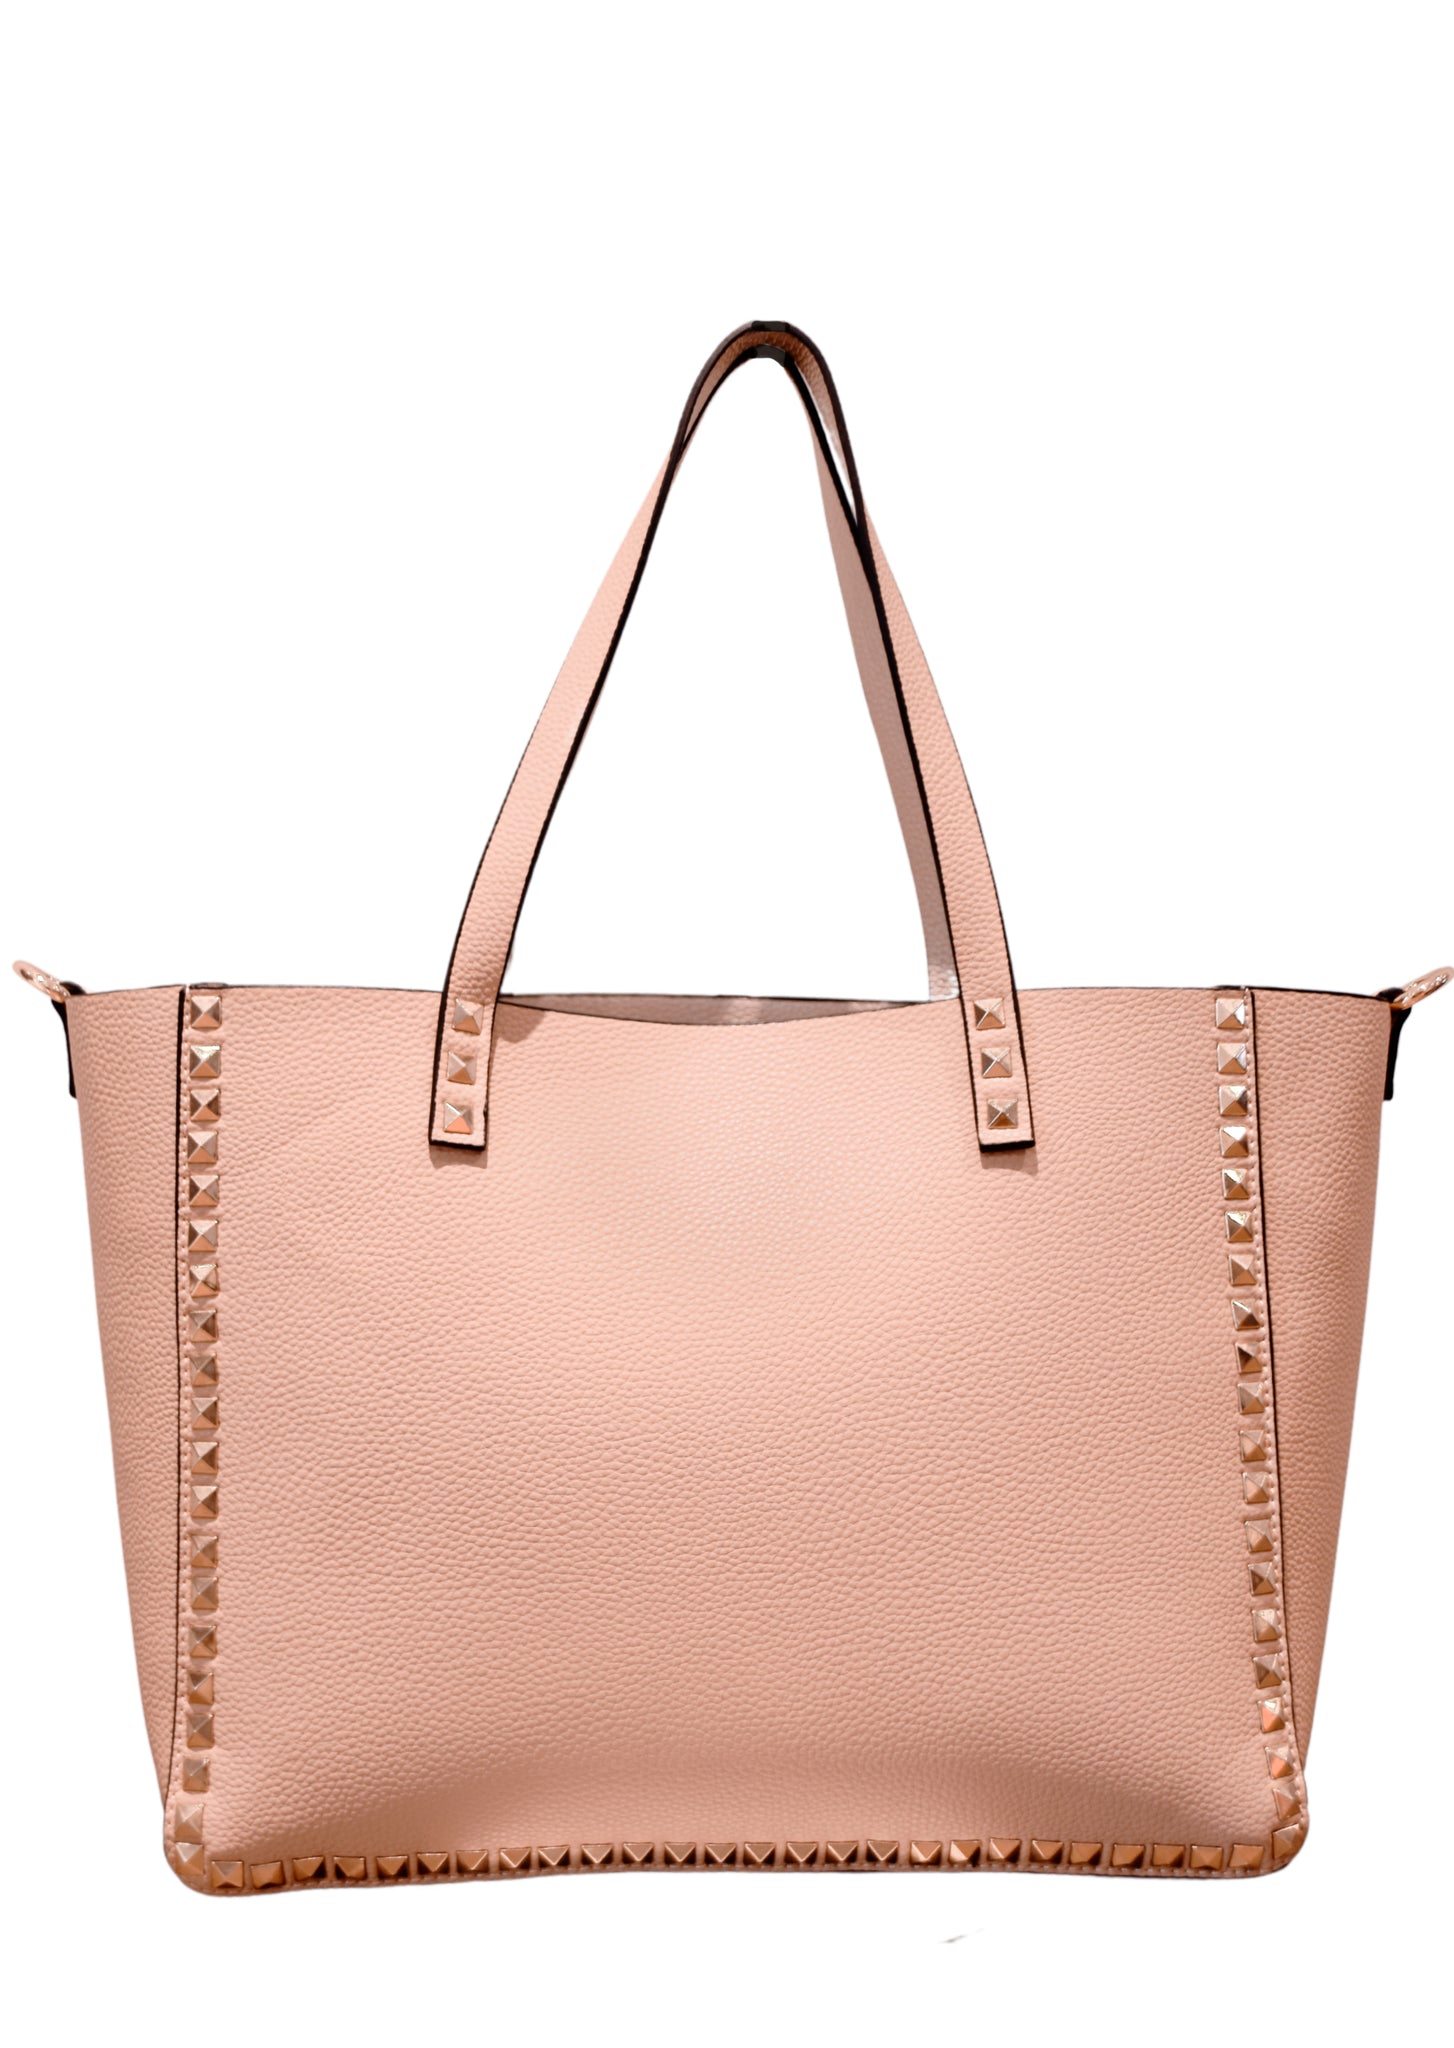 Vegan Two-Toned Tote Bag with Body Pouch COCONUDA